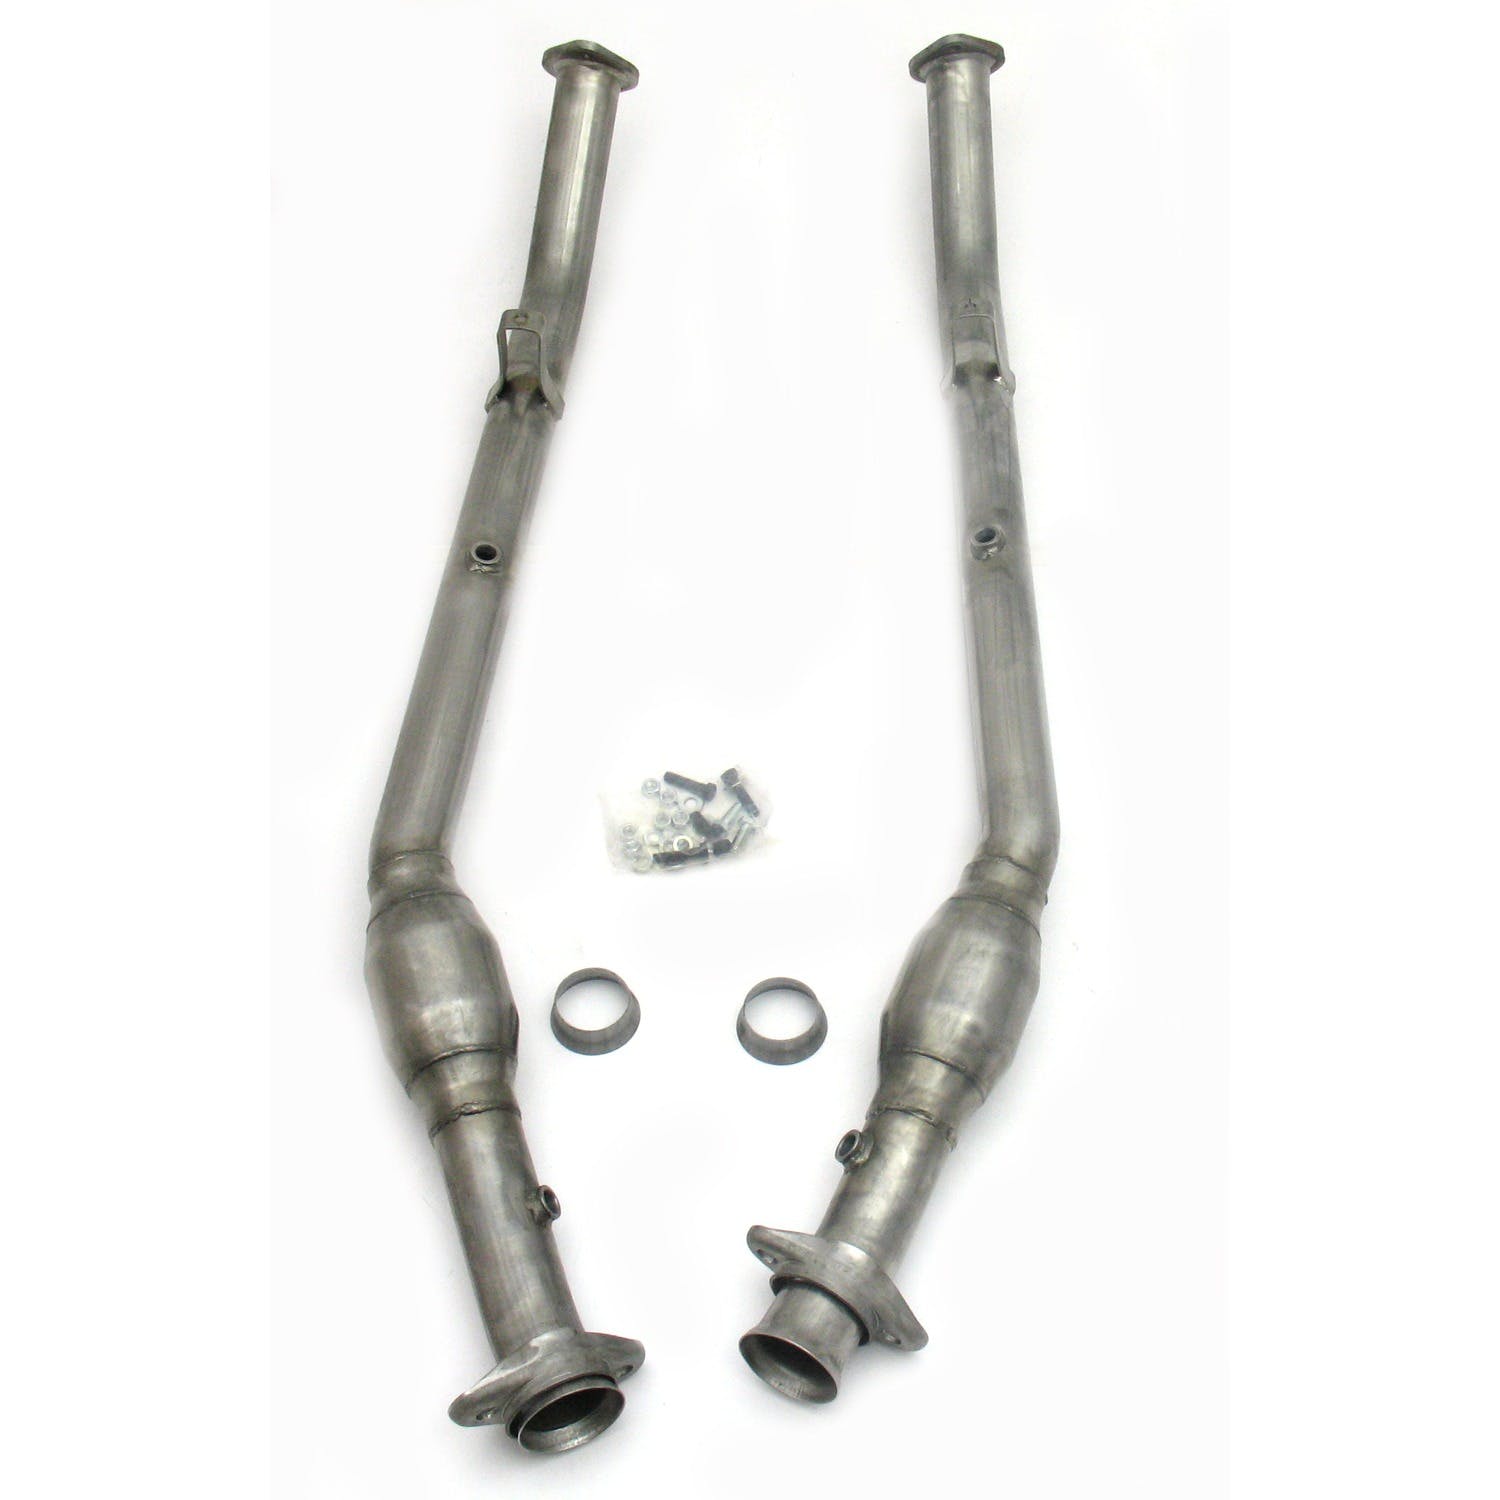 JBA Performance Exhaust 2809SYC 2809SYC 2.5 inch Stainless Steel Mid-Pipe 04 GTO with Cats 4